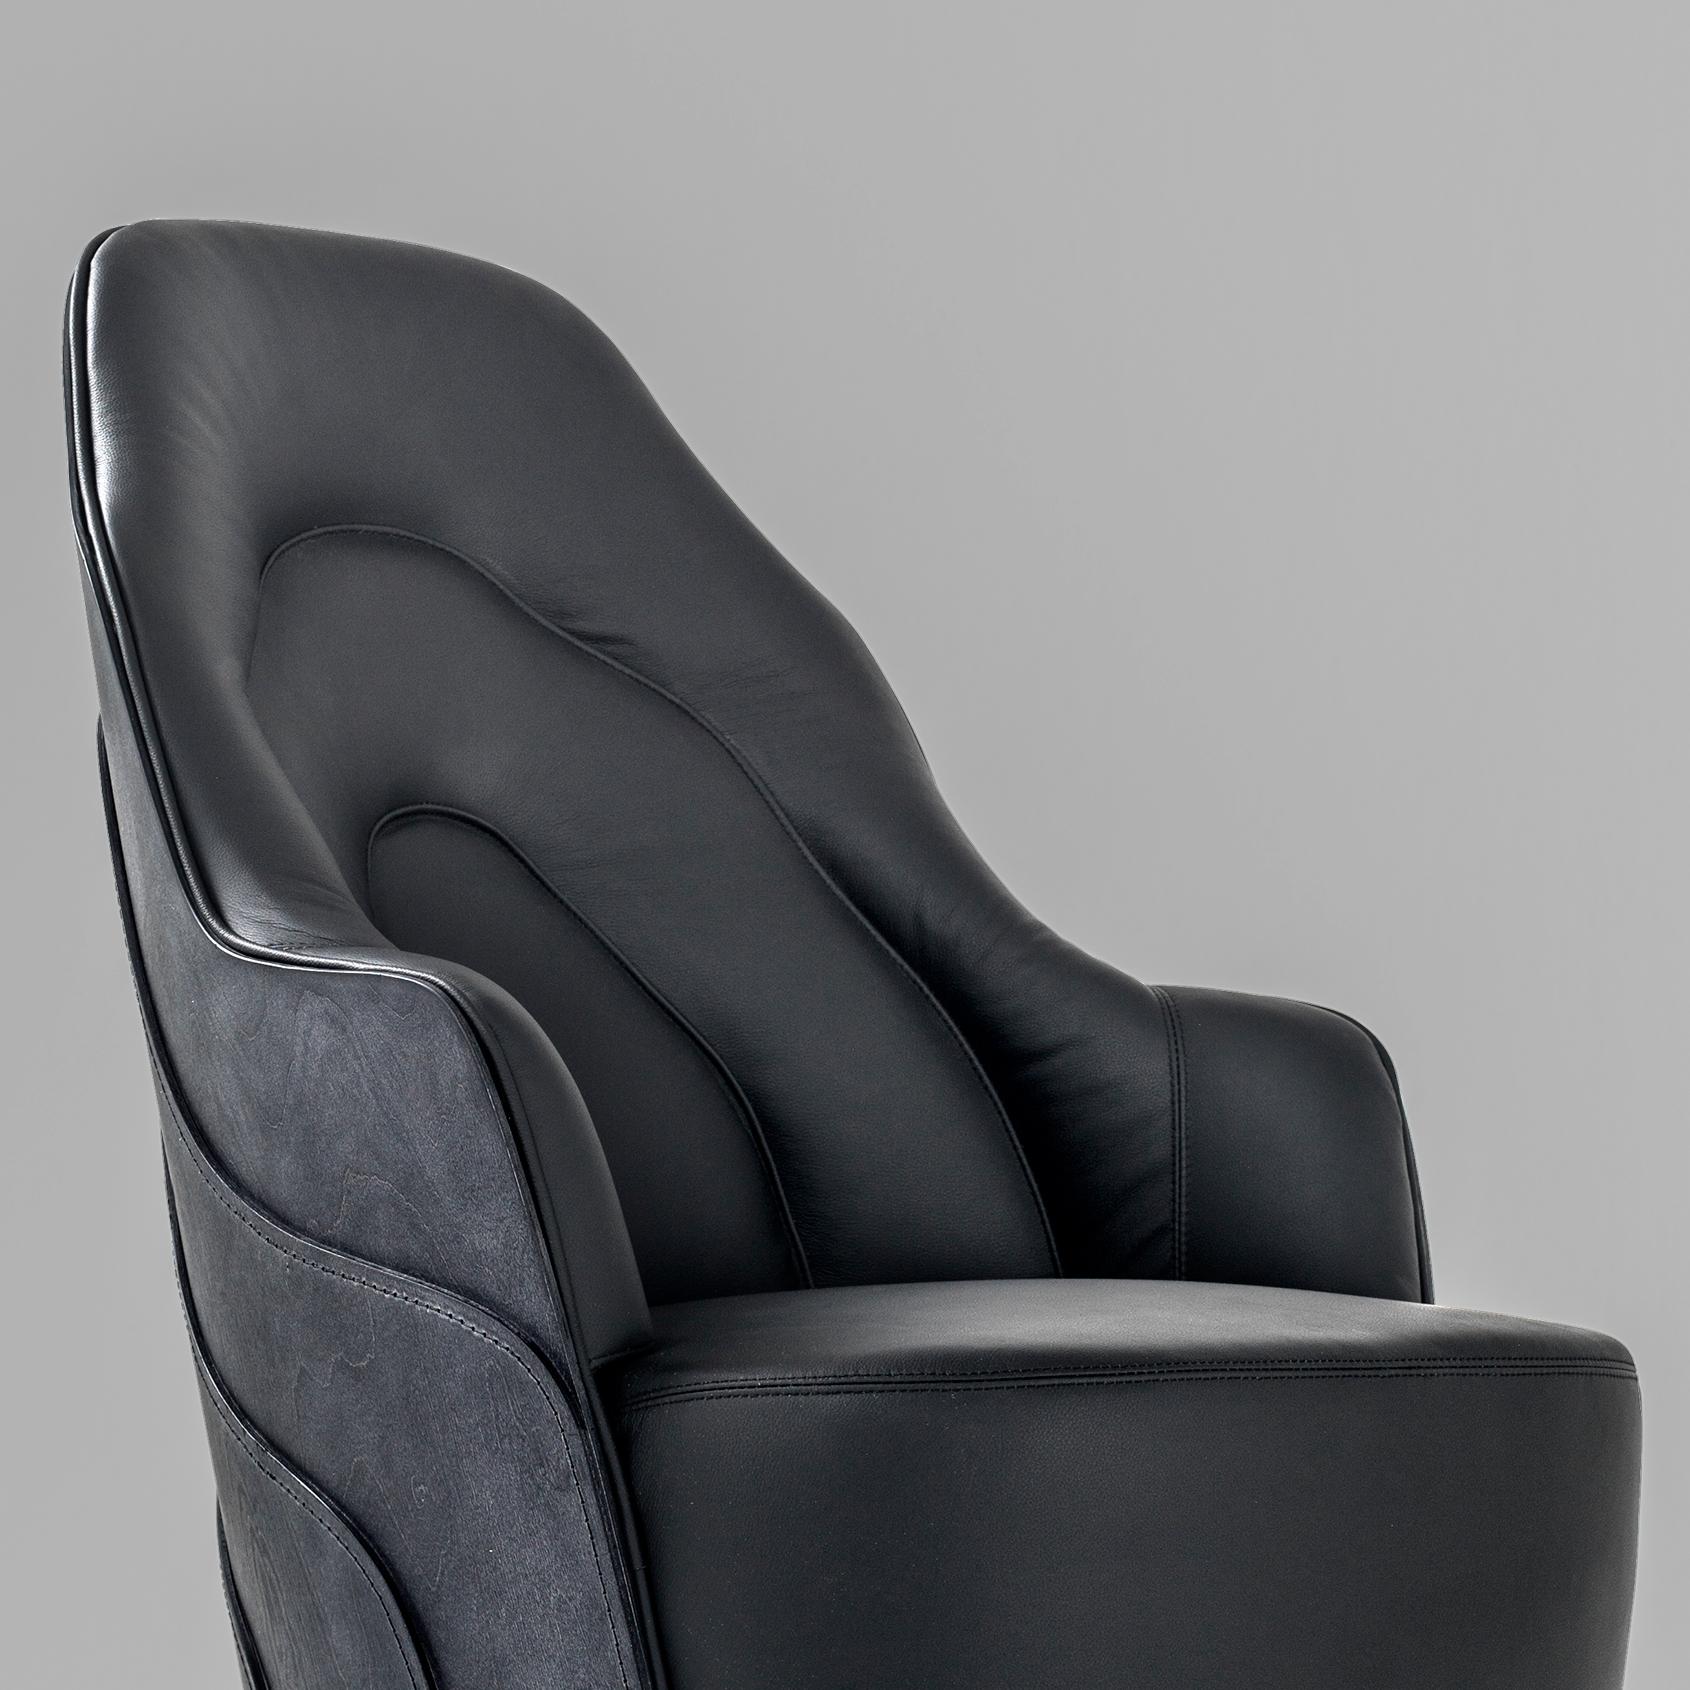 Leather Couture Armchair by Färg & Blanche in Black and Grey for BD Barcelona